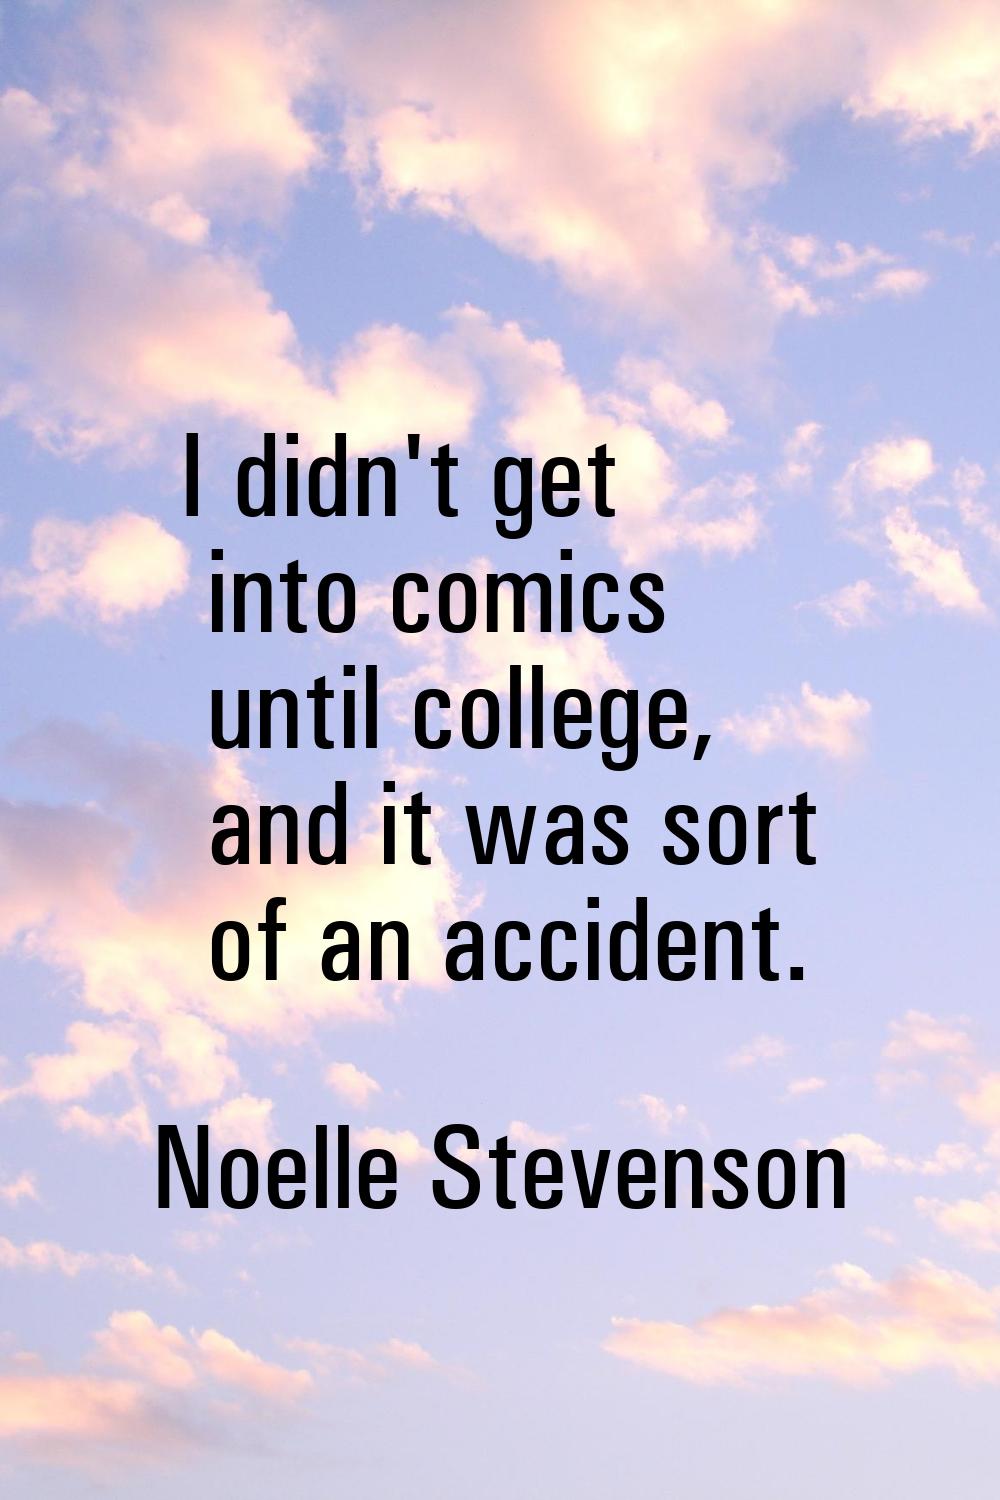 I didn't get into comics until college, and it was sort of an accident.